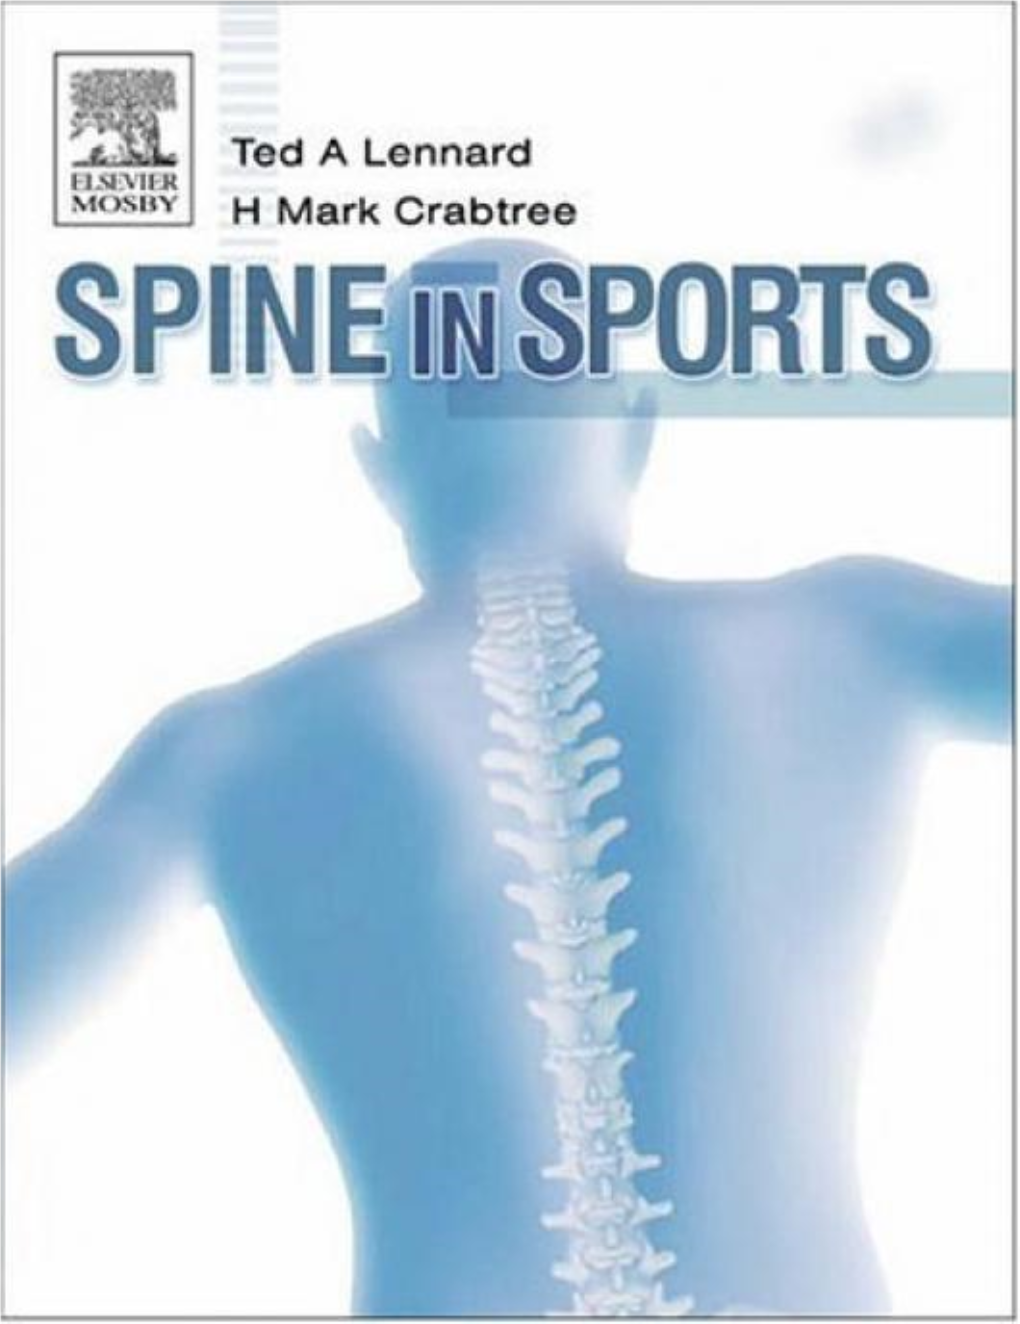 Spine in Sports, Is Divided Into Three Sections